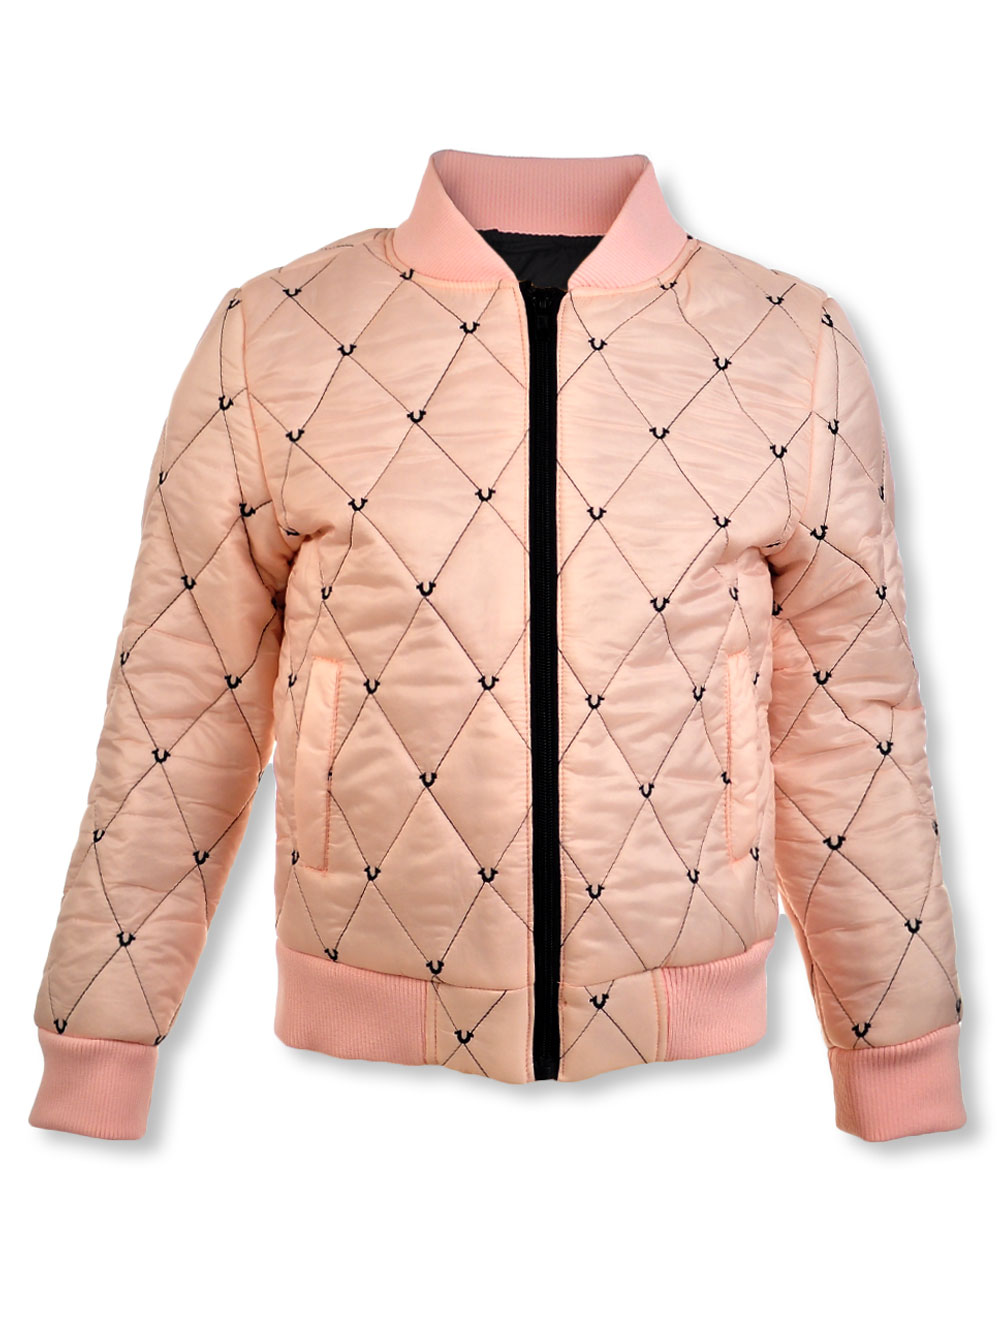 Girls' Quilted Jacket by True Religion 